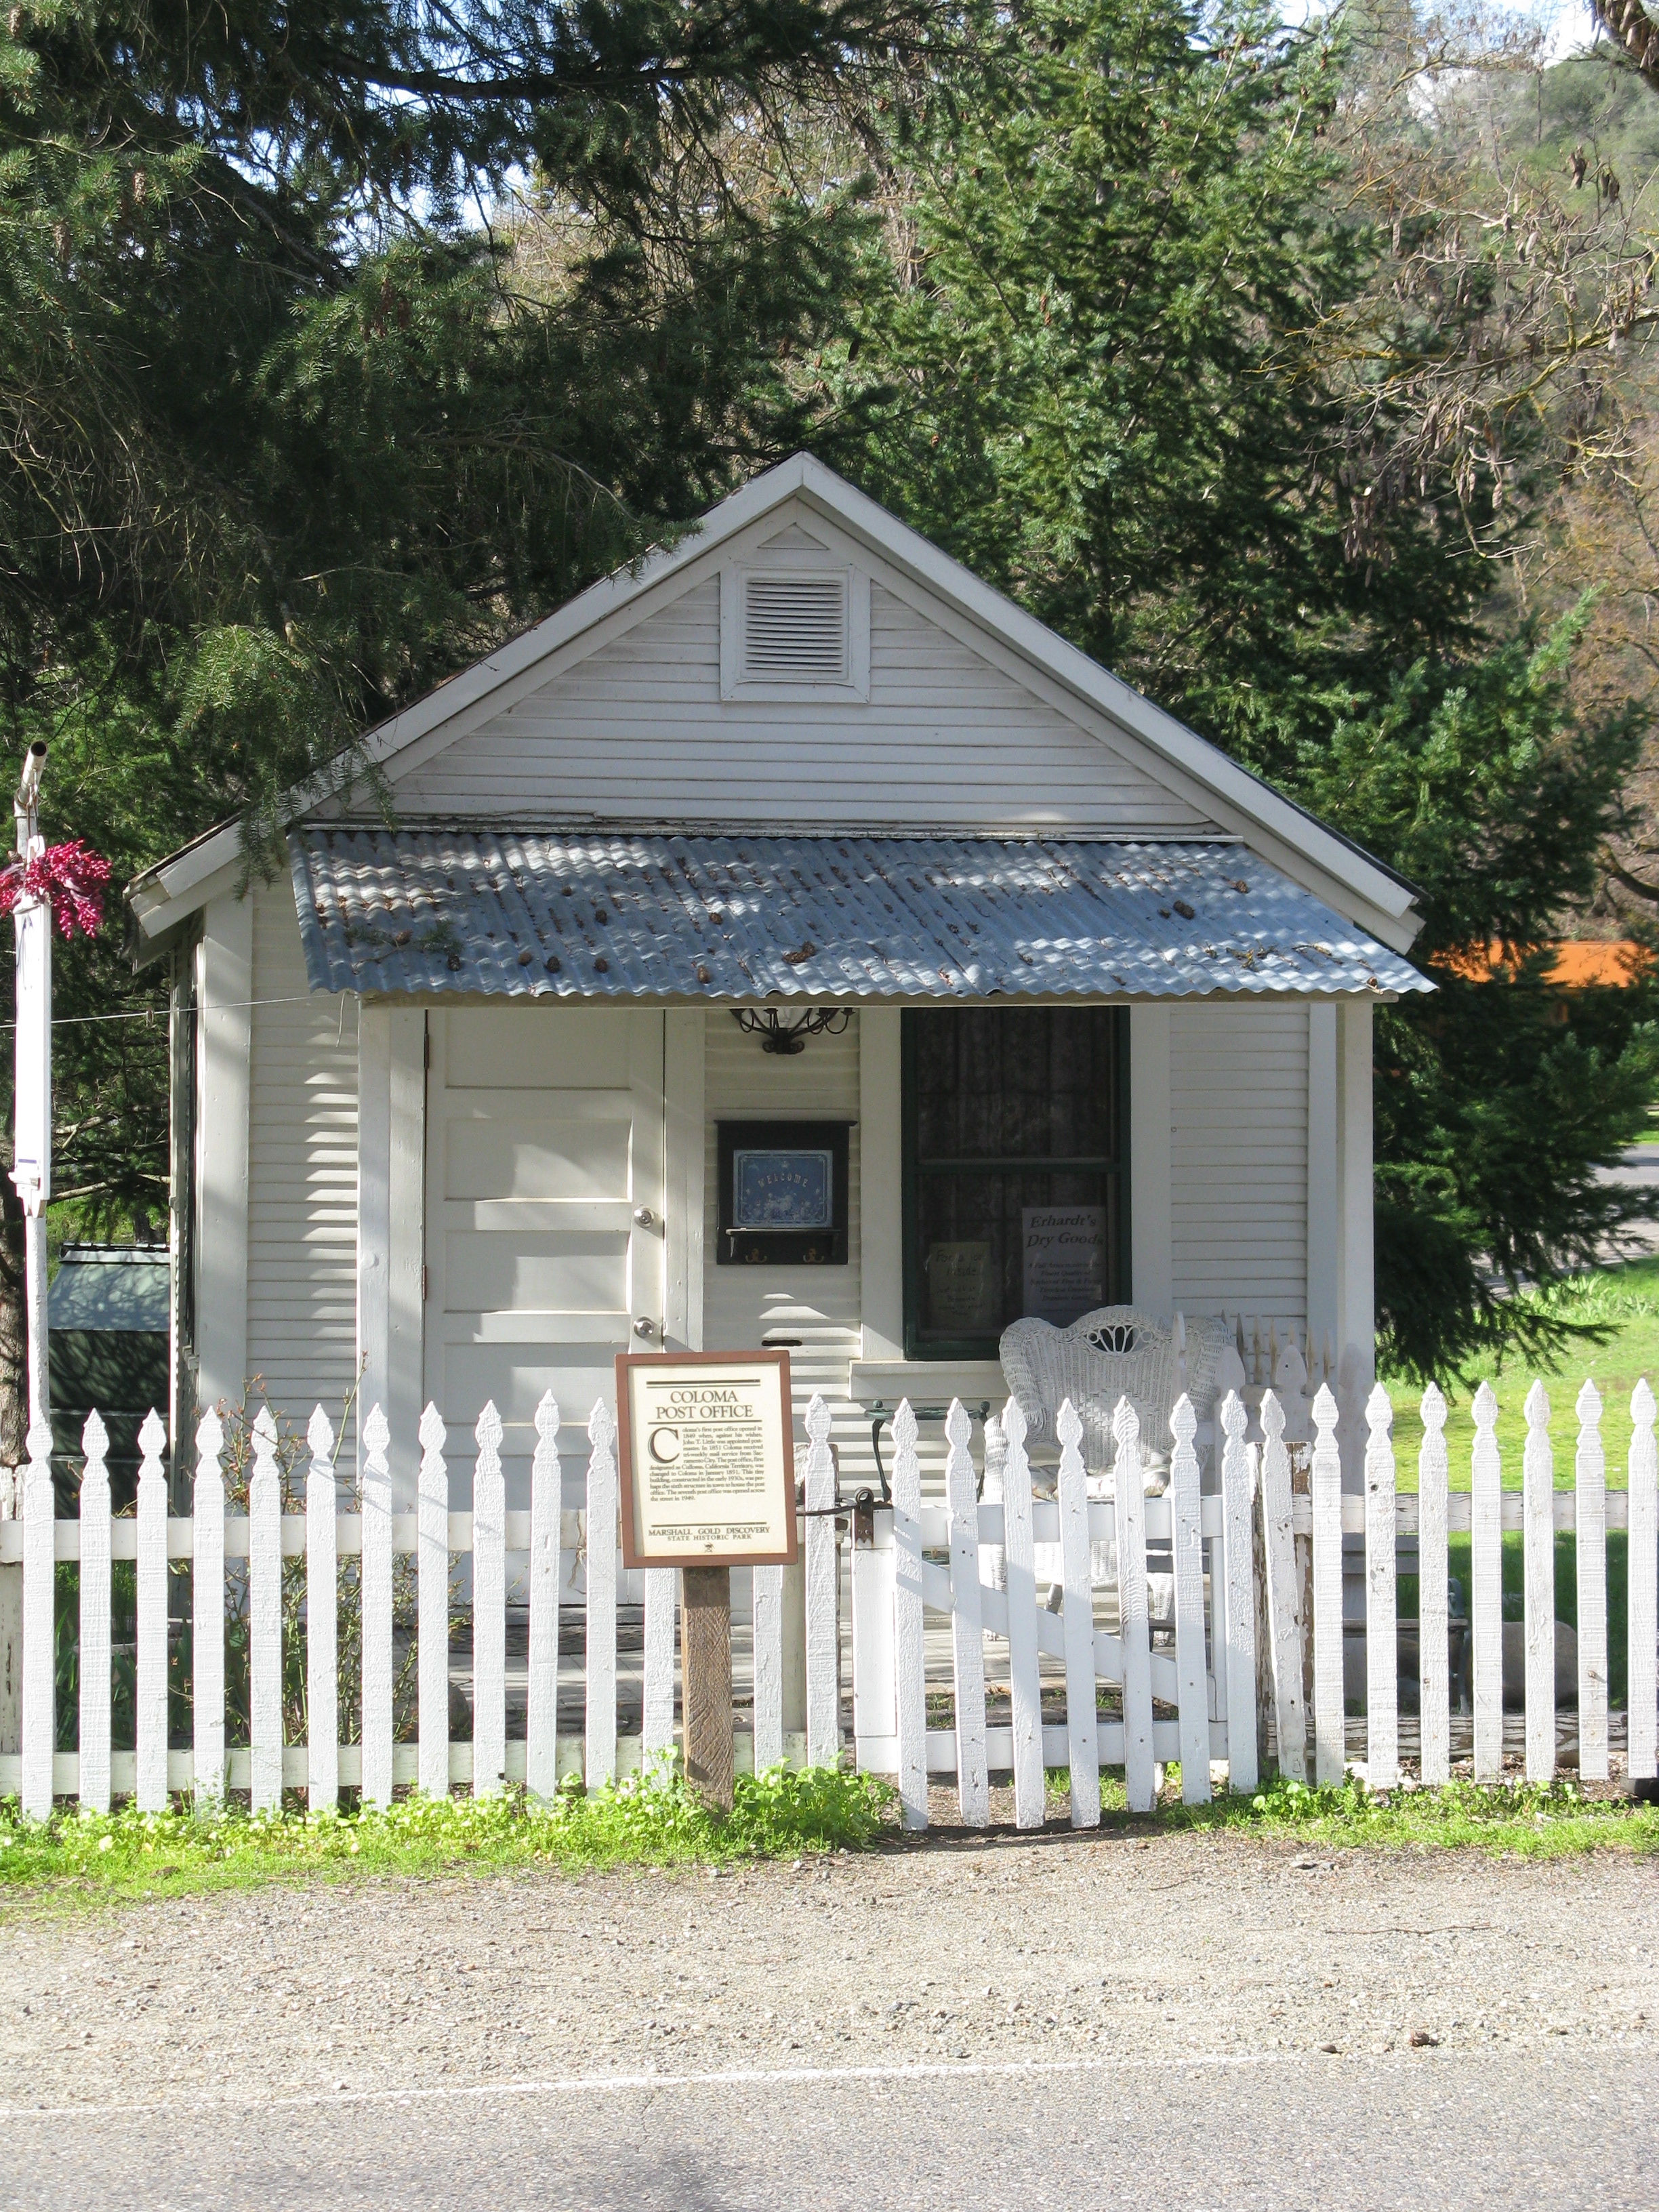 The Sixth Coloma Post Office